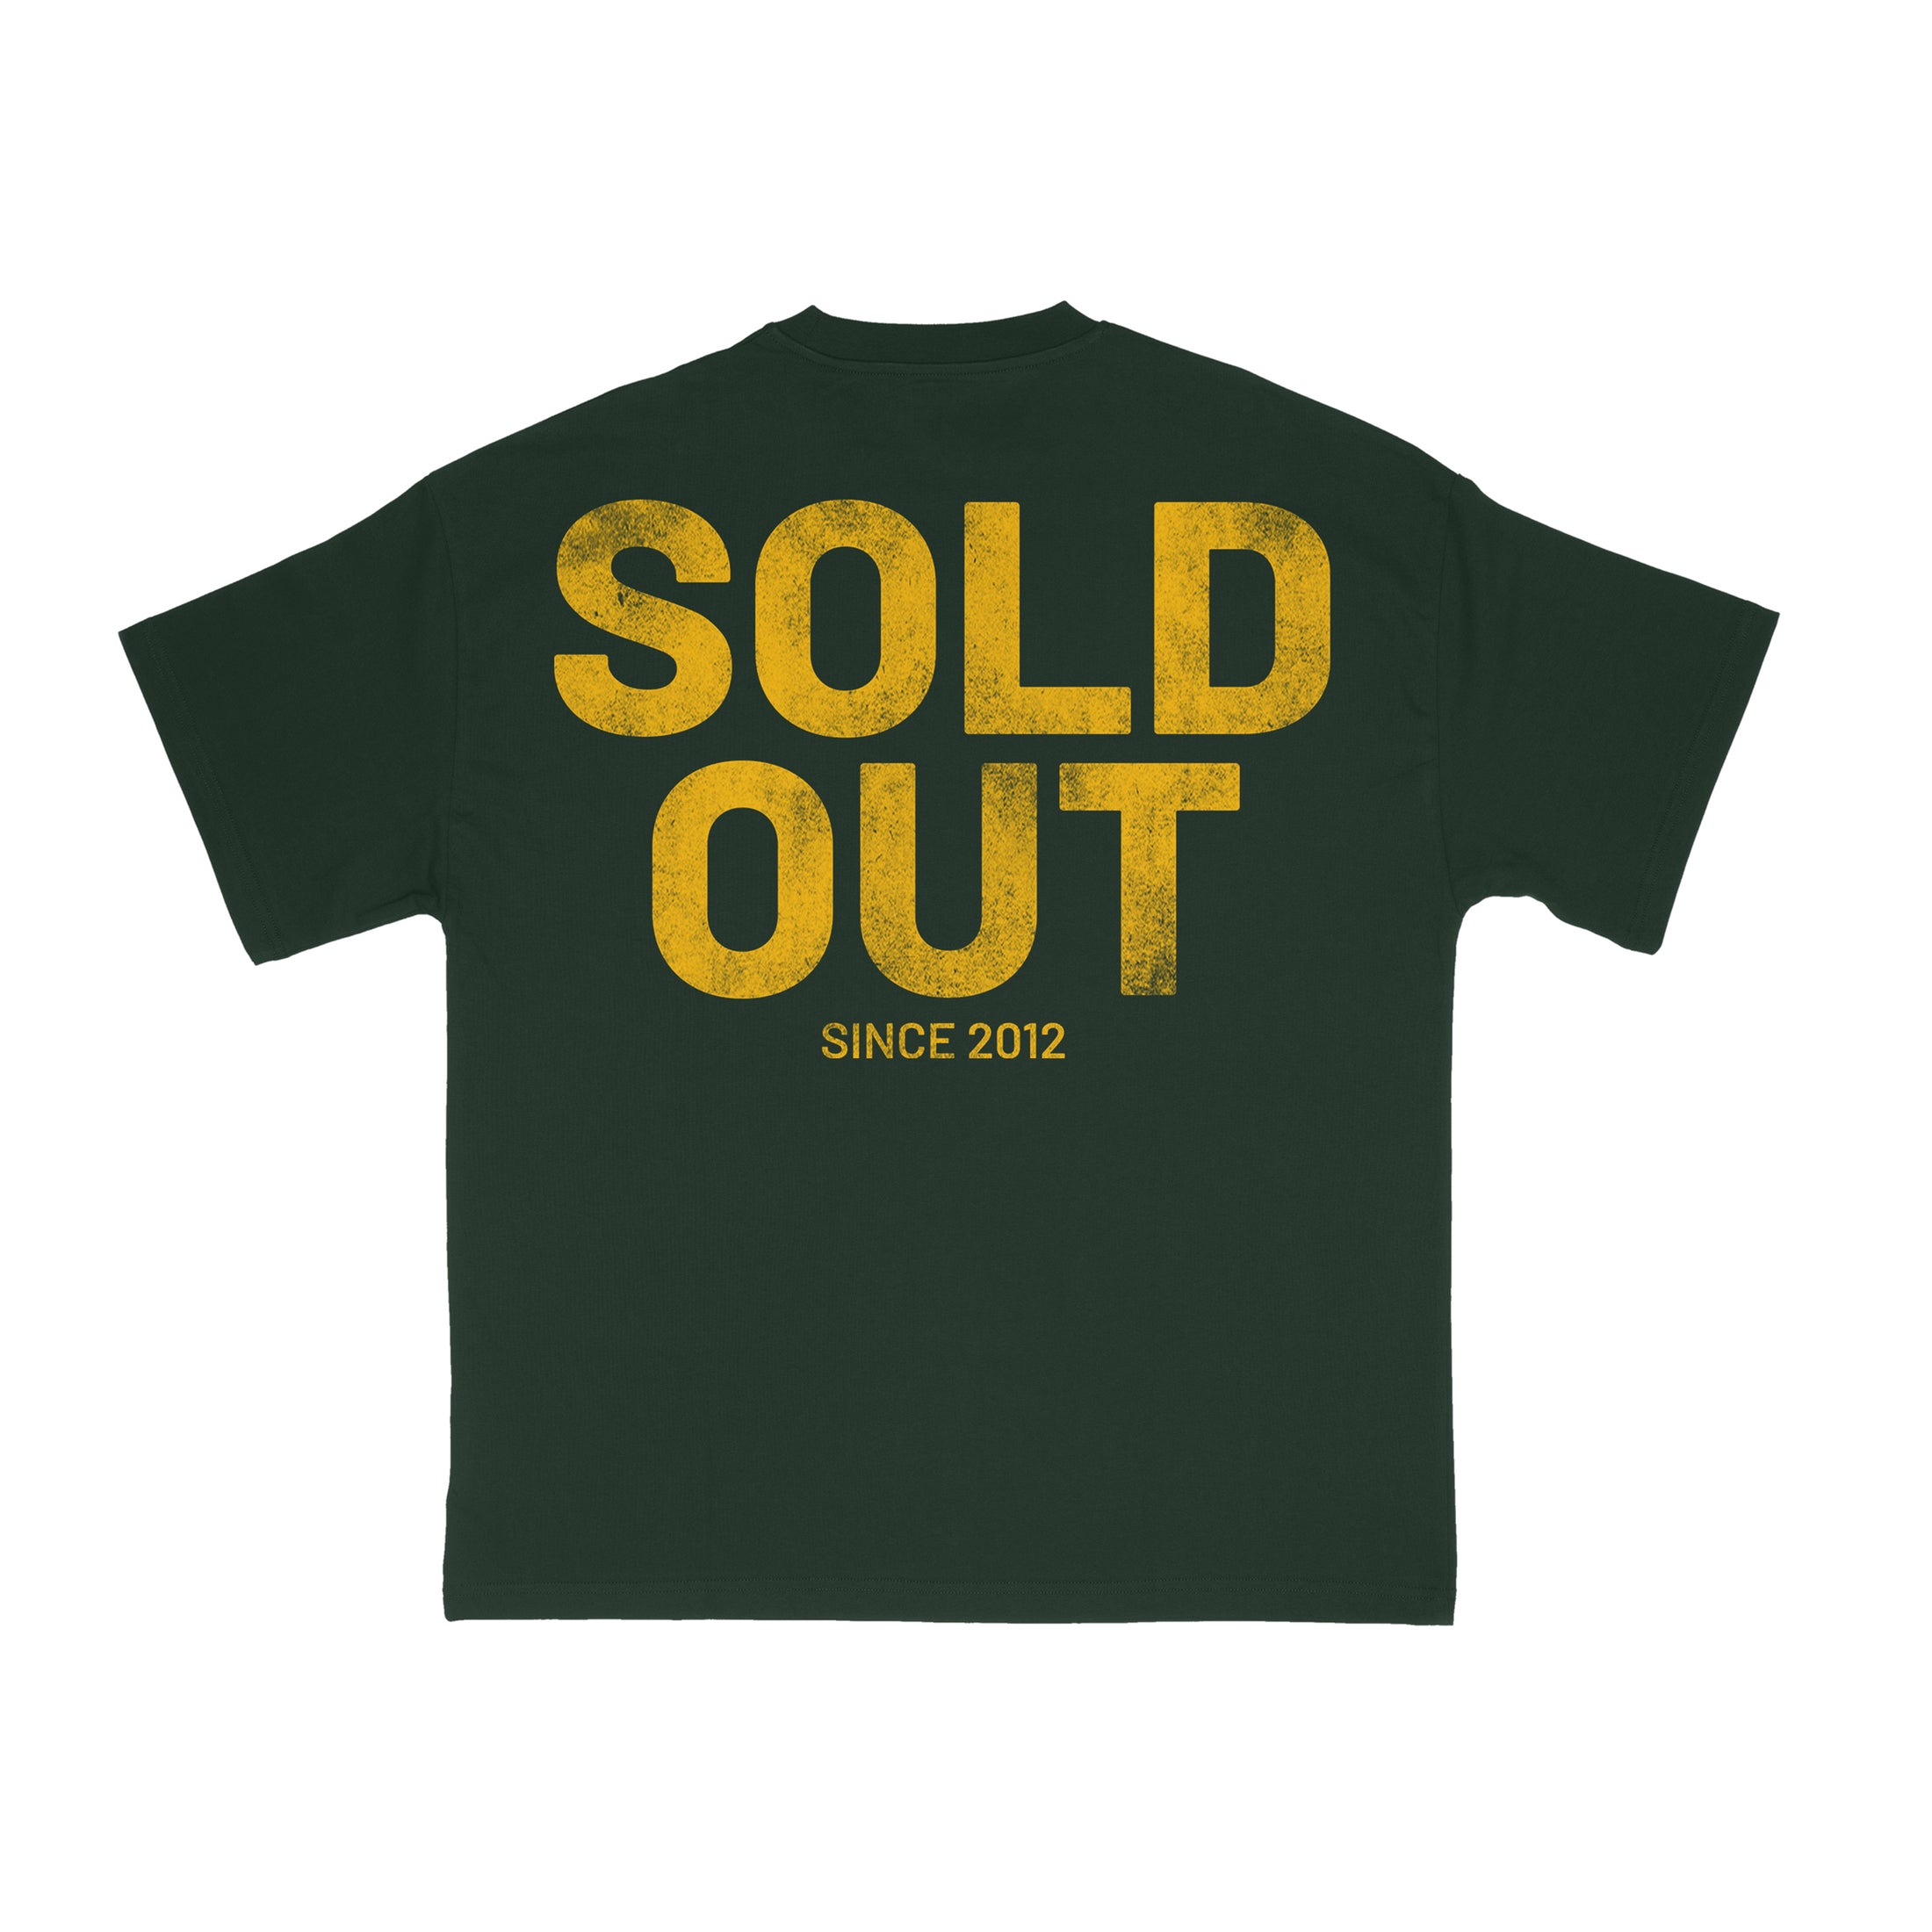 SOLD OUT (Green/Gold)